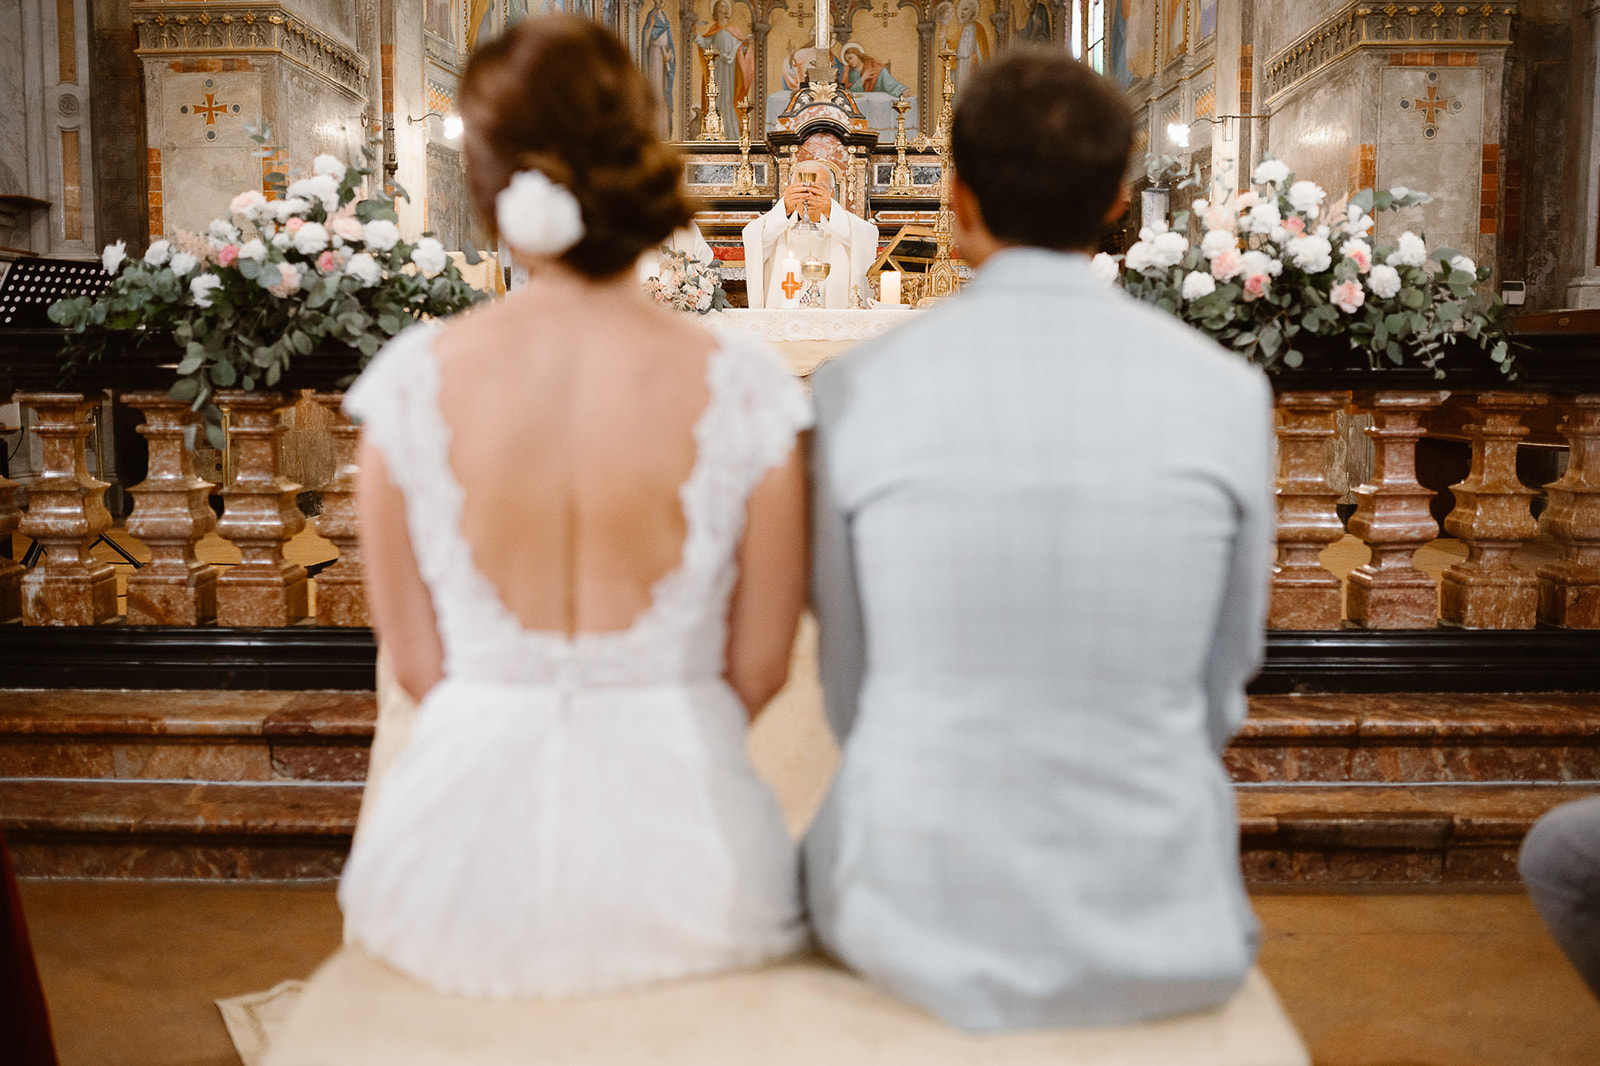 Italian priest officiating a wedding ceremony in a Church